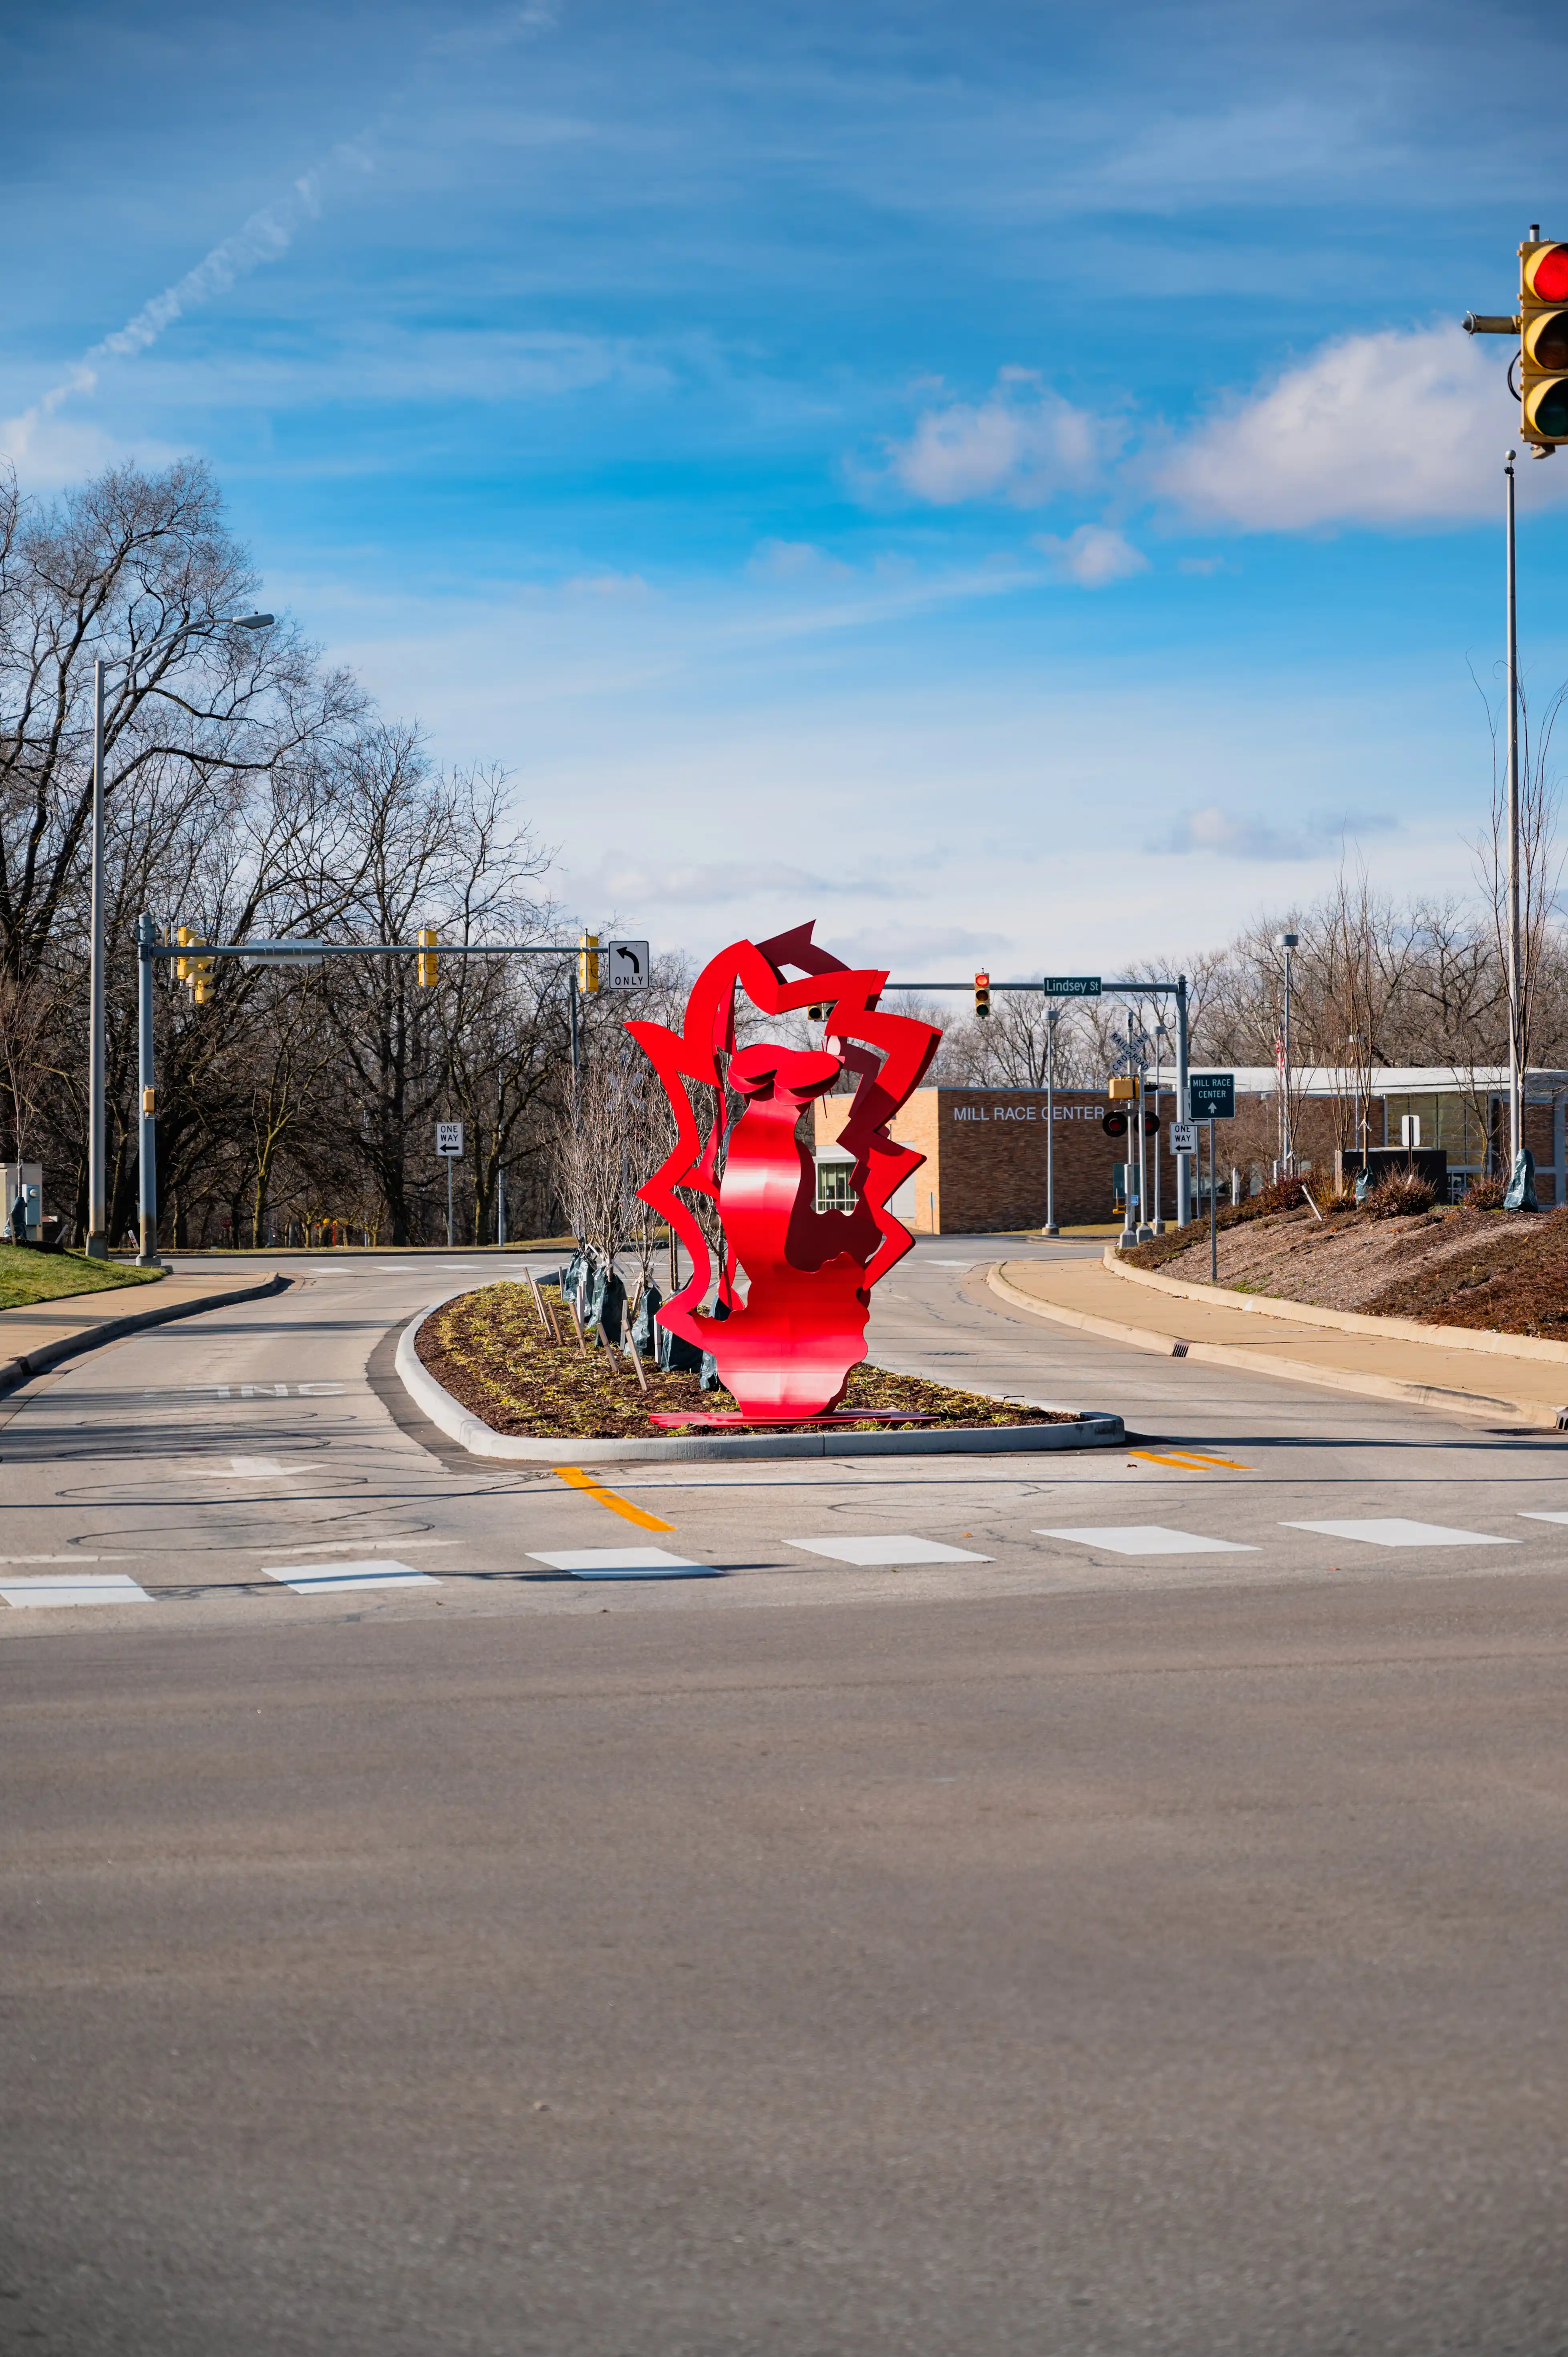 Red sculptural art piece in the shape of the number 8, located in the center of a traffic roundabout on a sunny day.